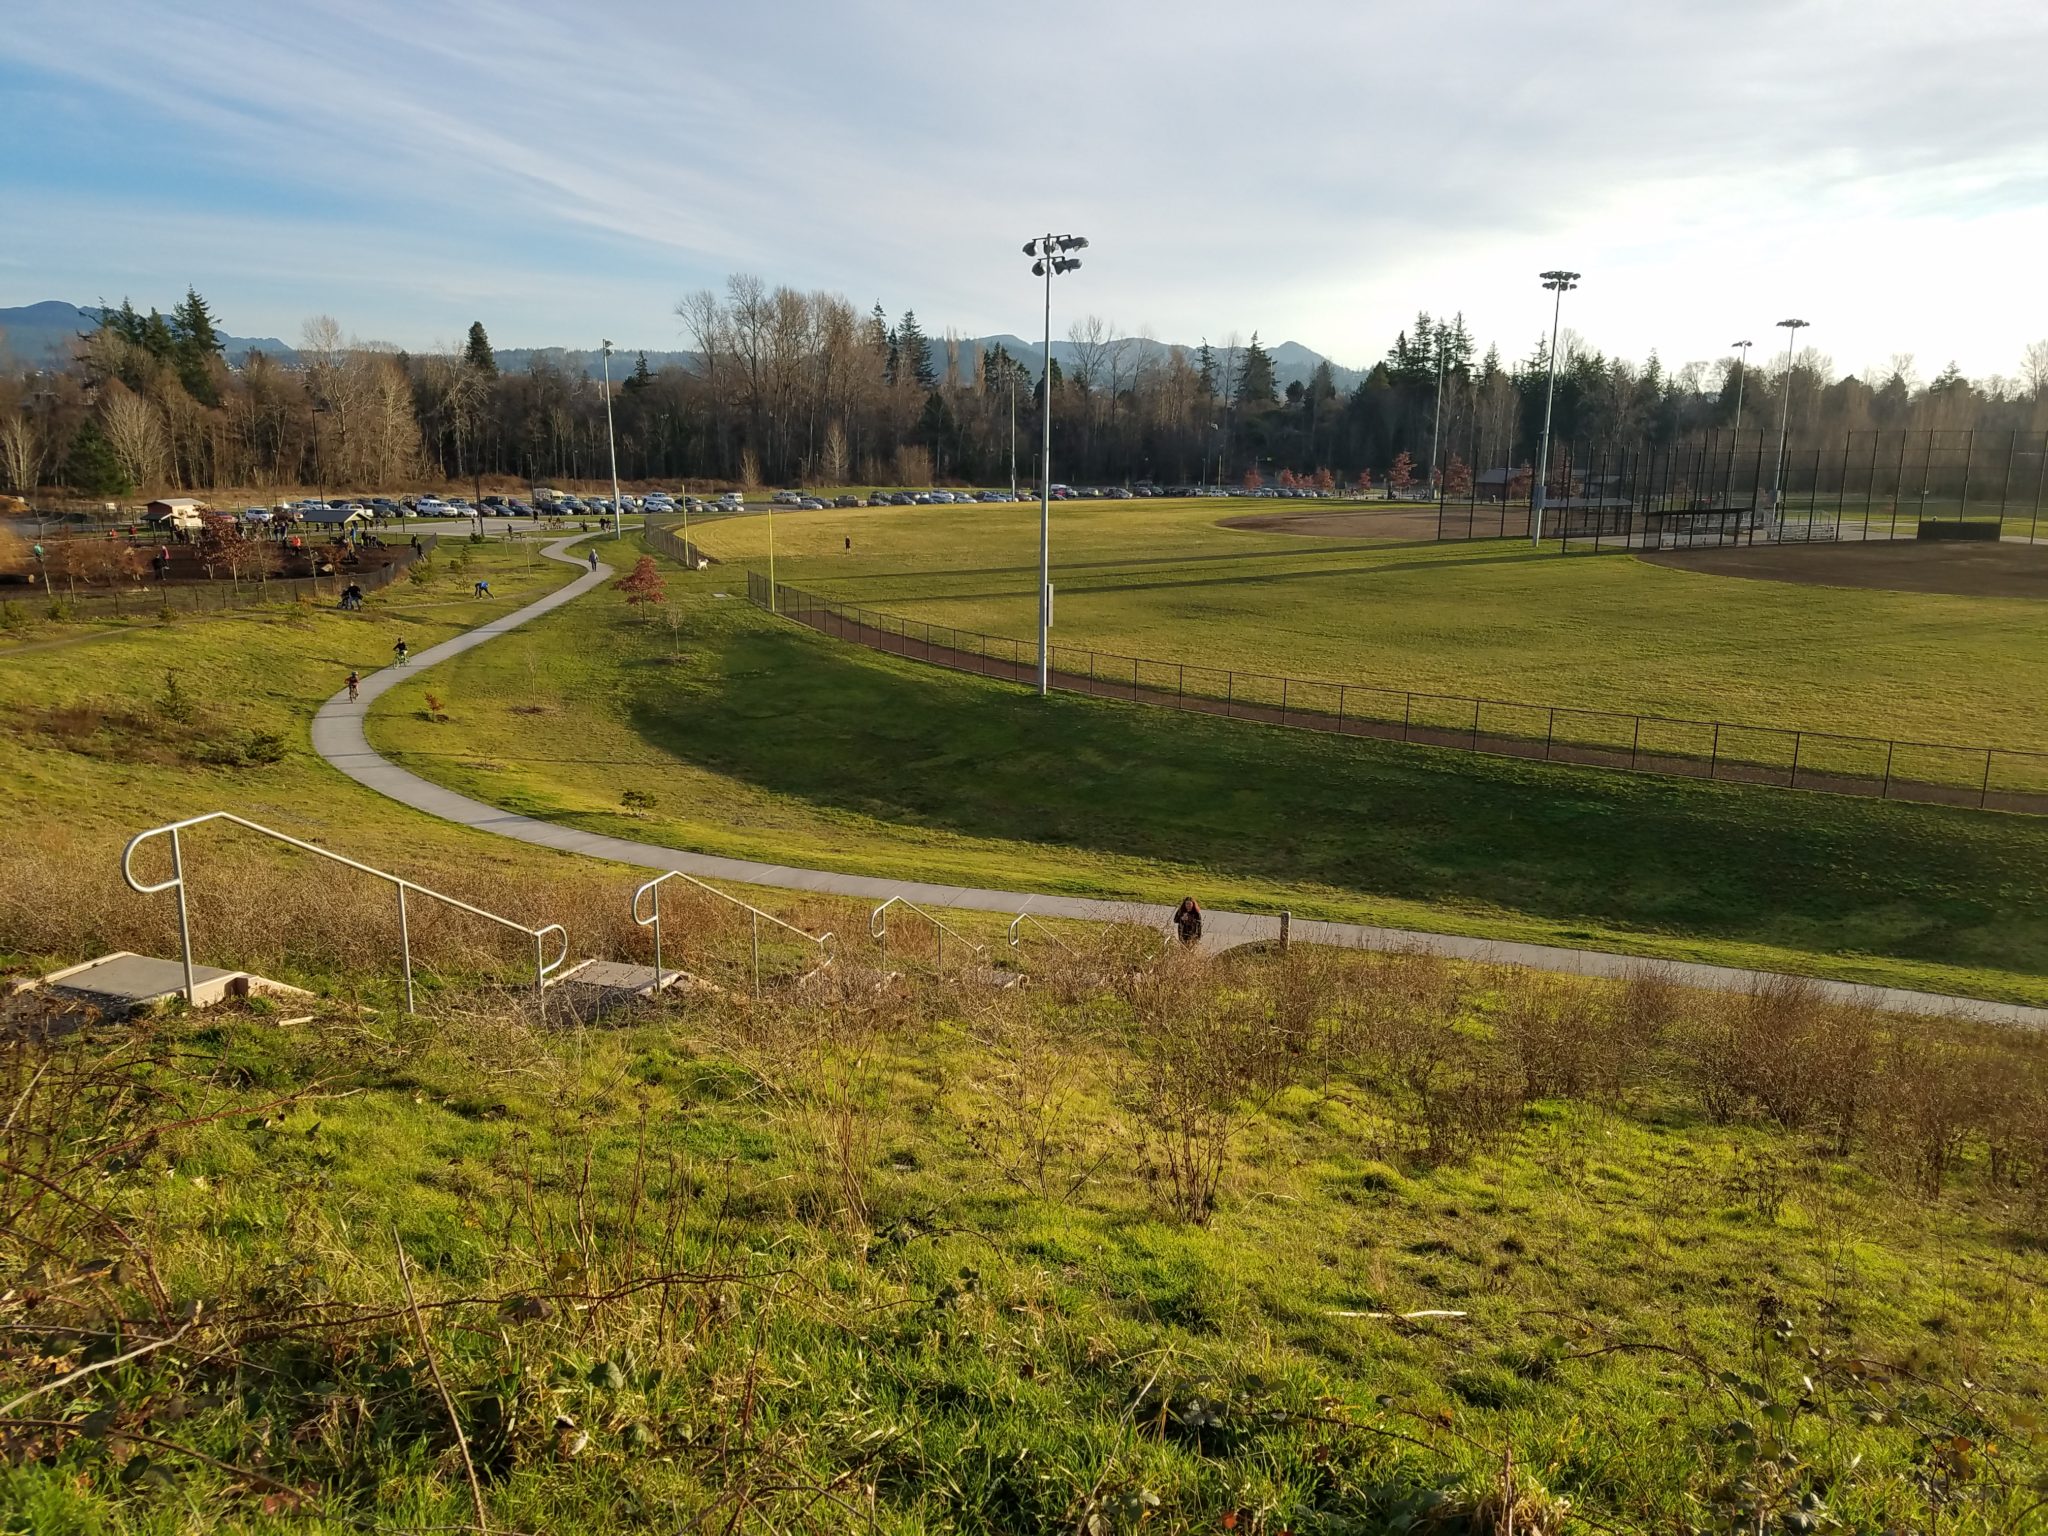 This is a view of the ball field infiltration basins and trail. Water from under the ball fields and from the adjacent hillside collect in these basins where it is infiltrated into the ground.